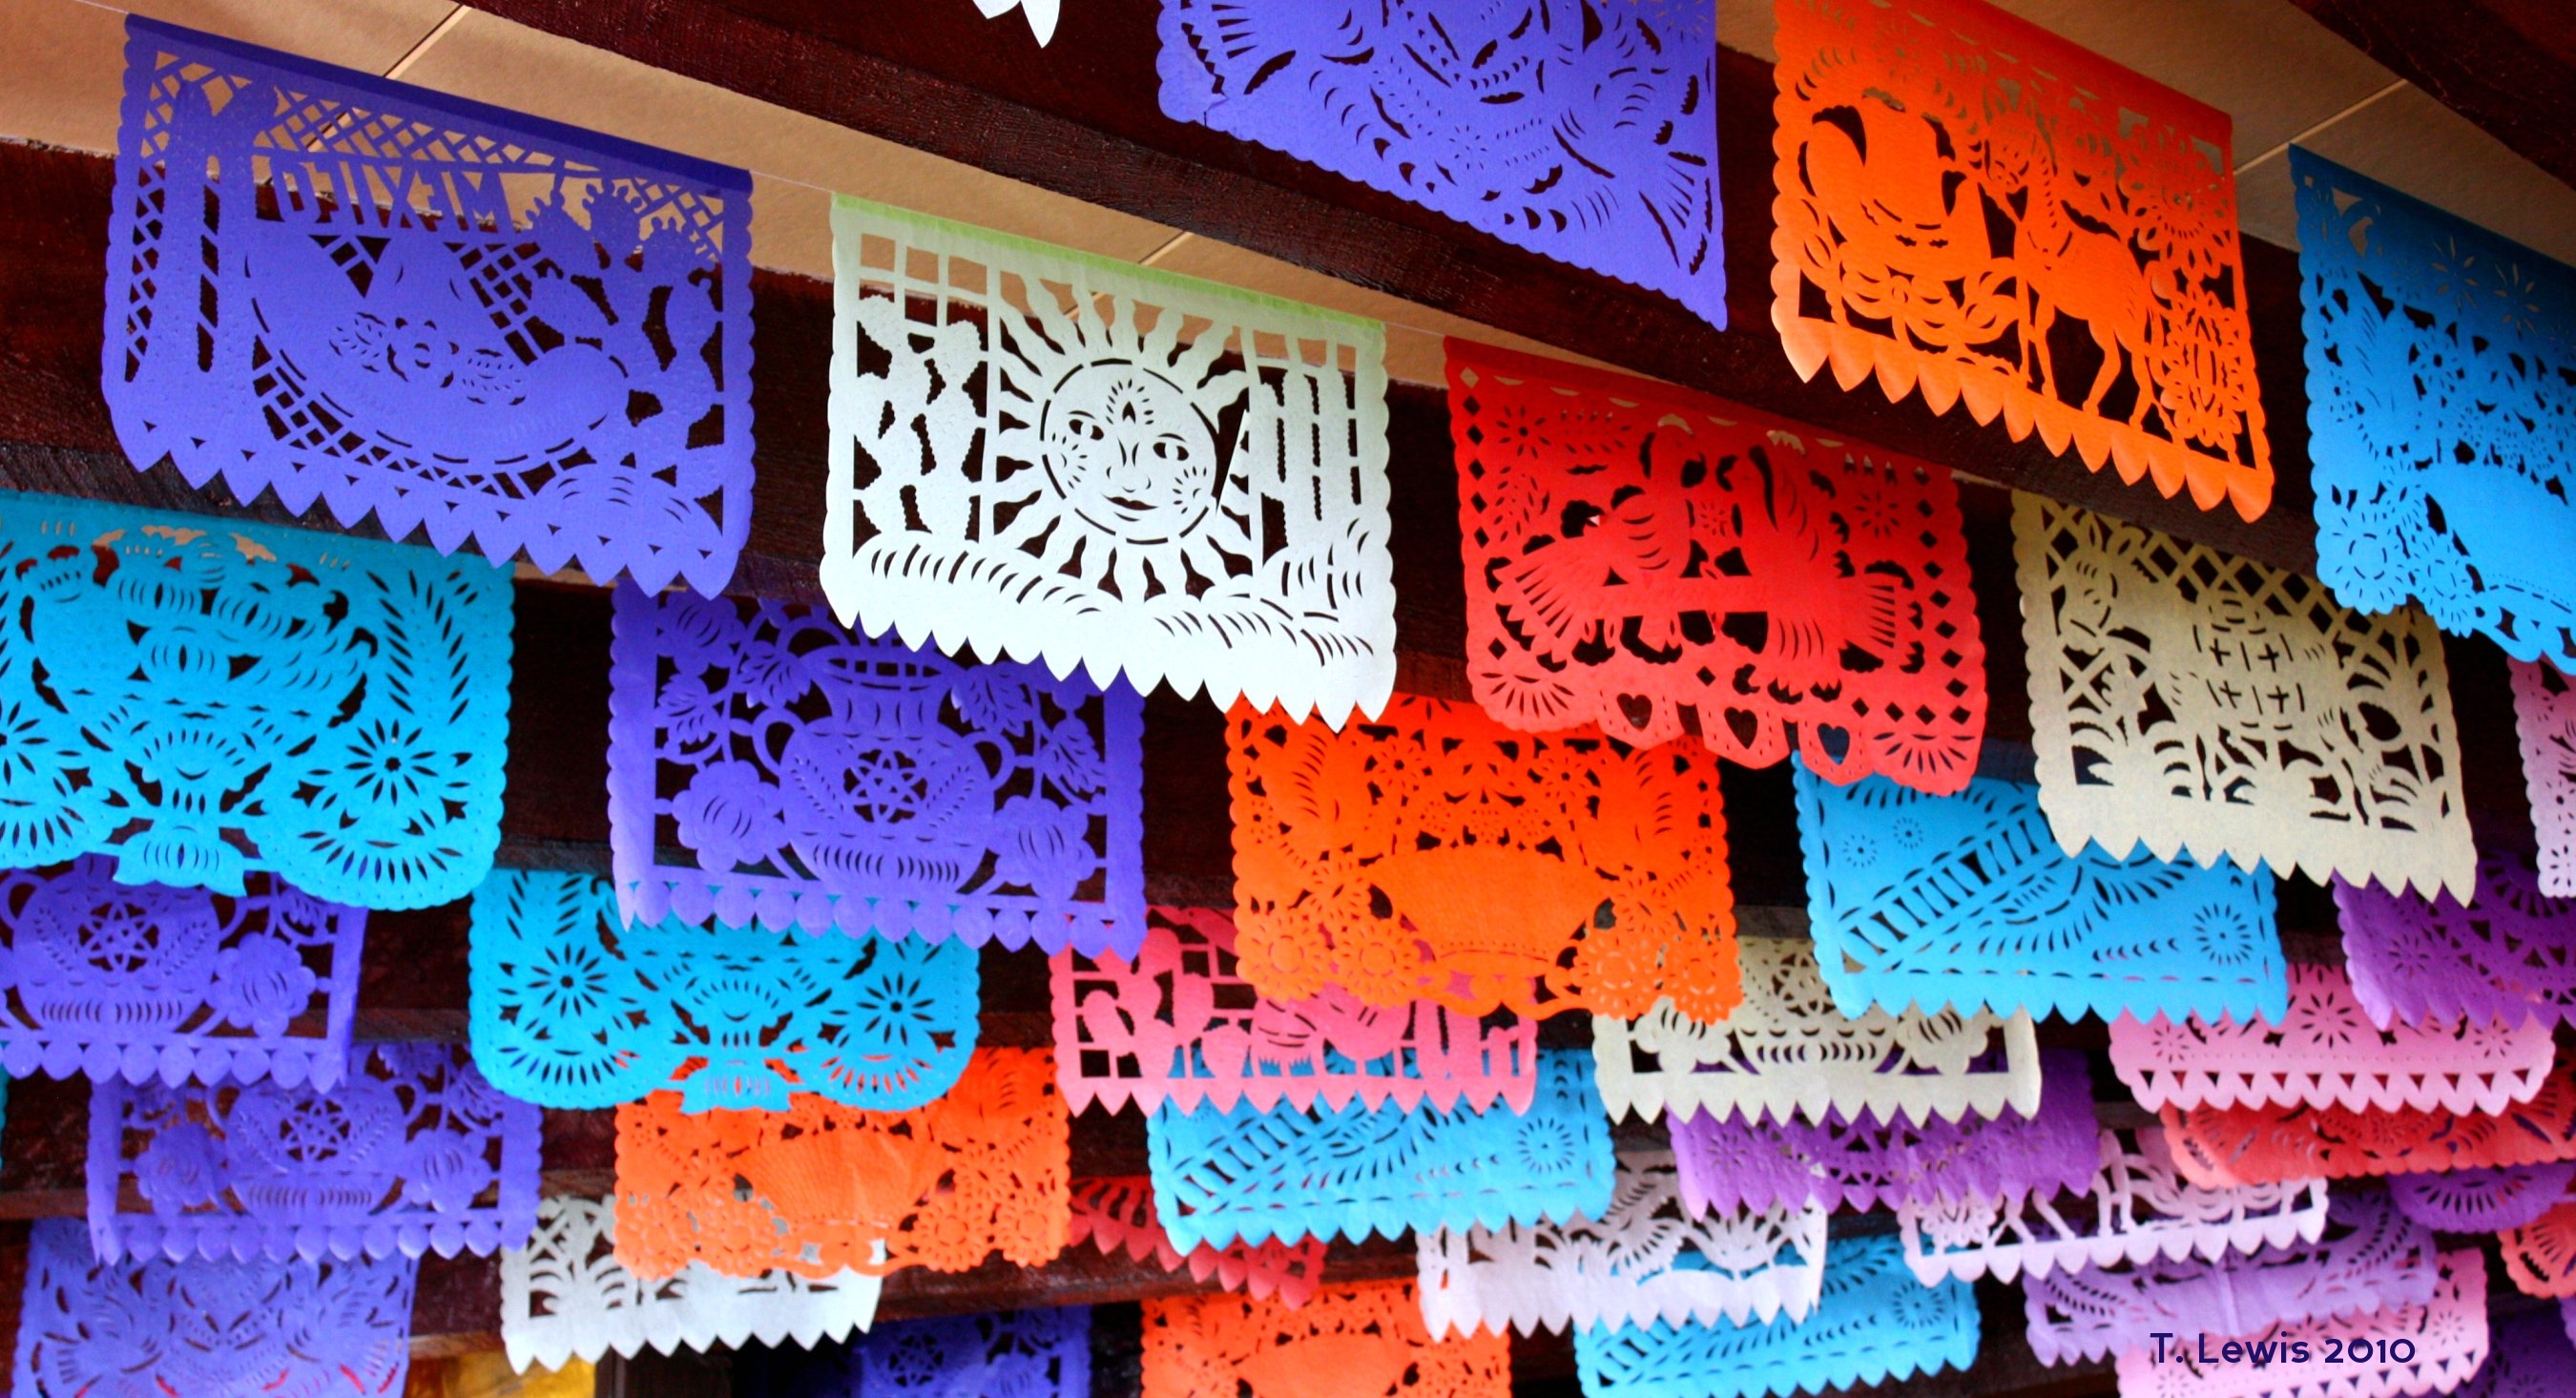 Colorful hanging papel picado banners - from Wikimedia Commons